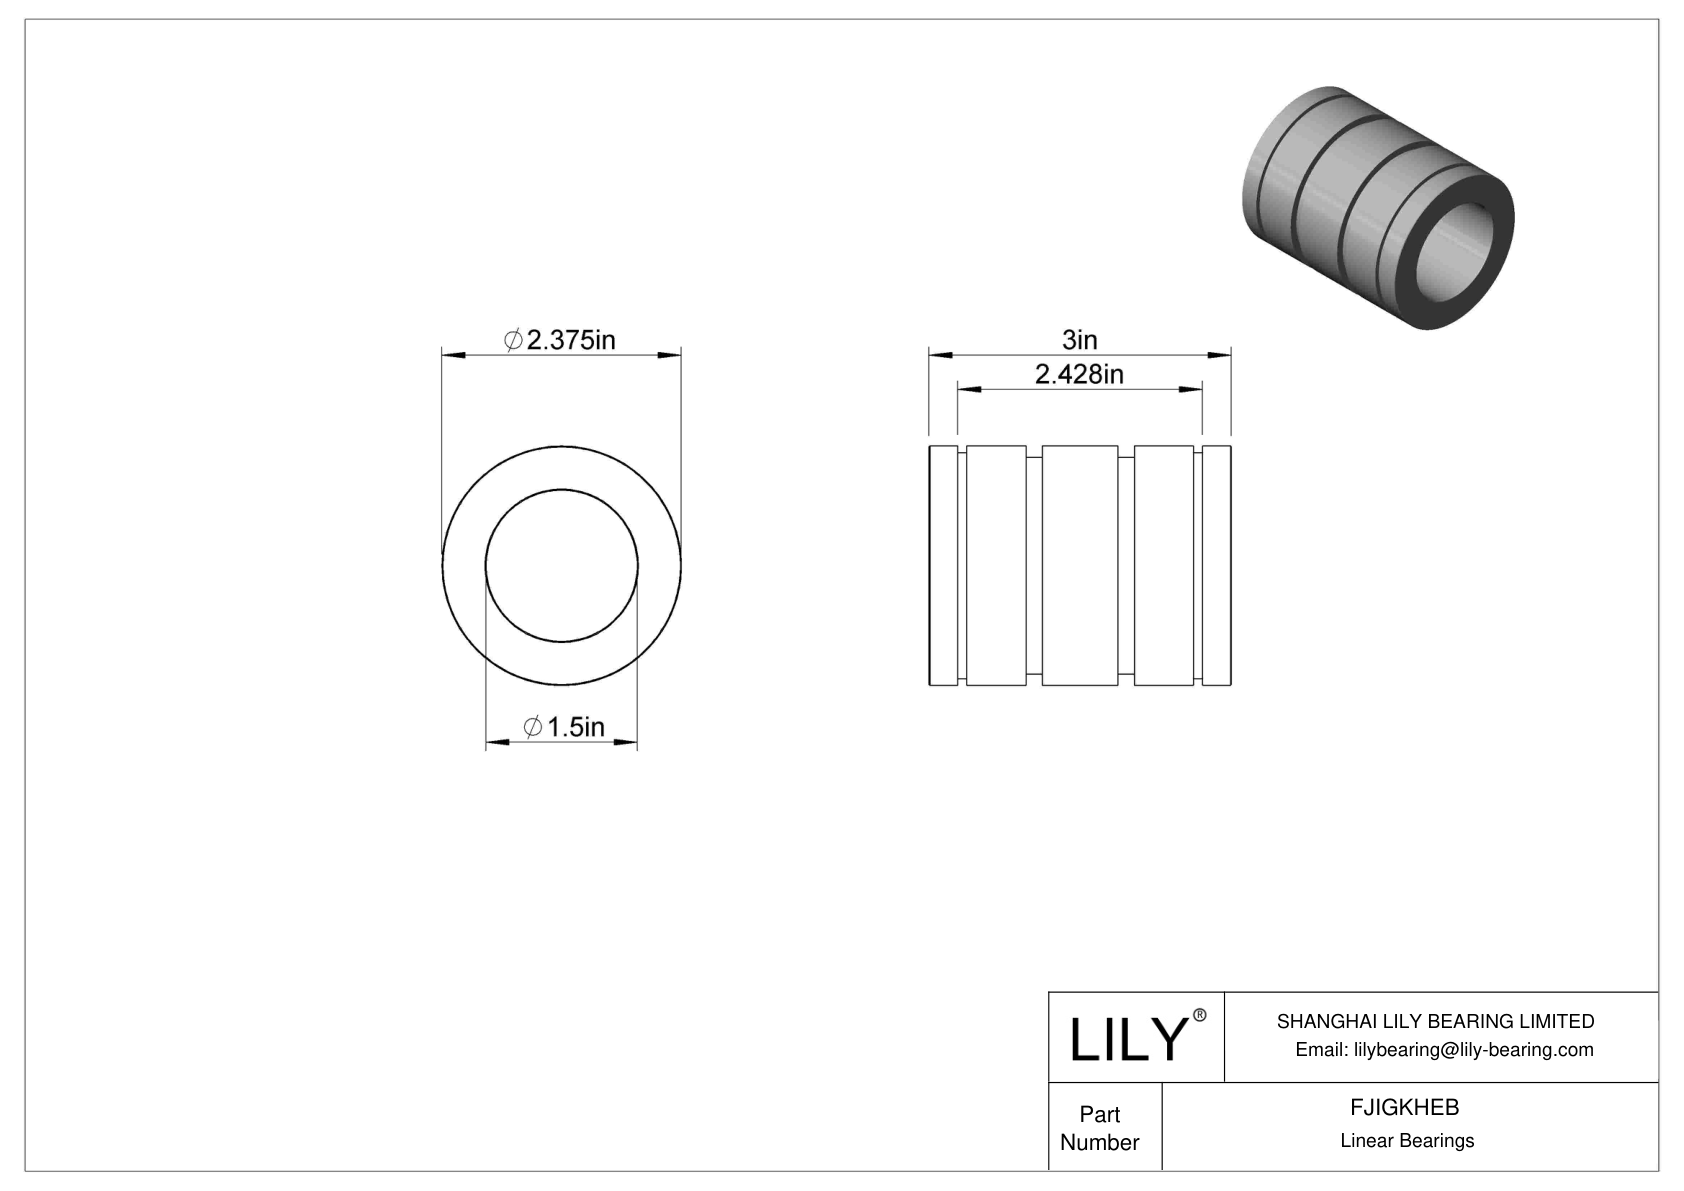 FJIGKHEB Common Linear Sleeve Bearings cad drawing